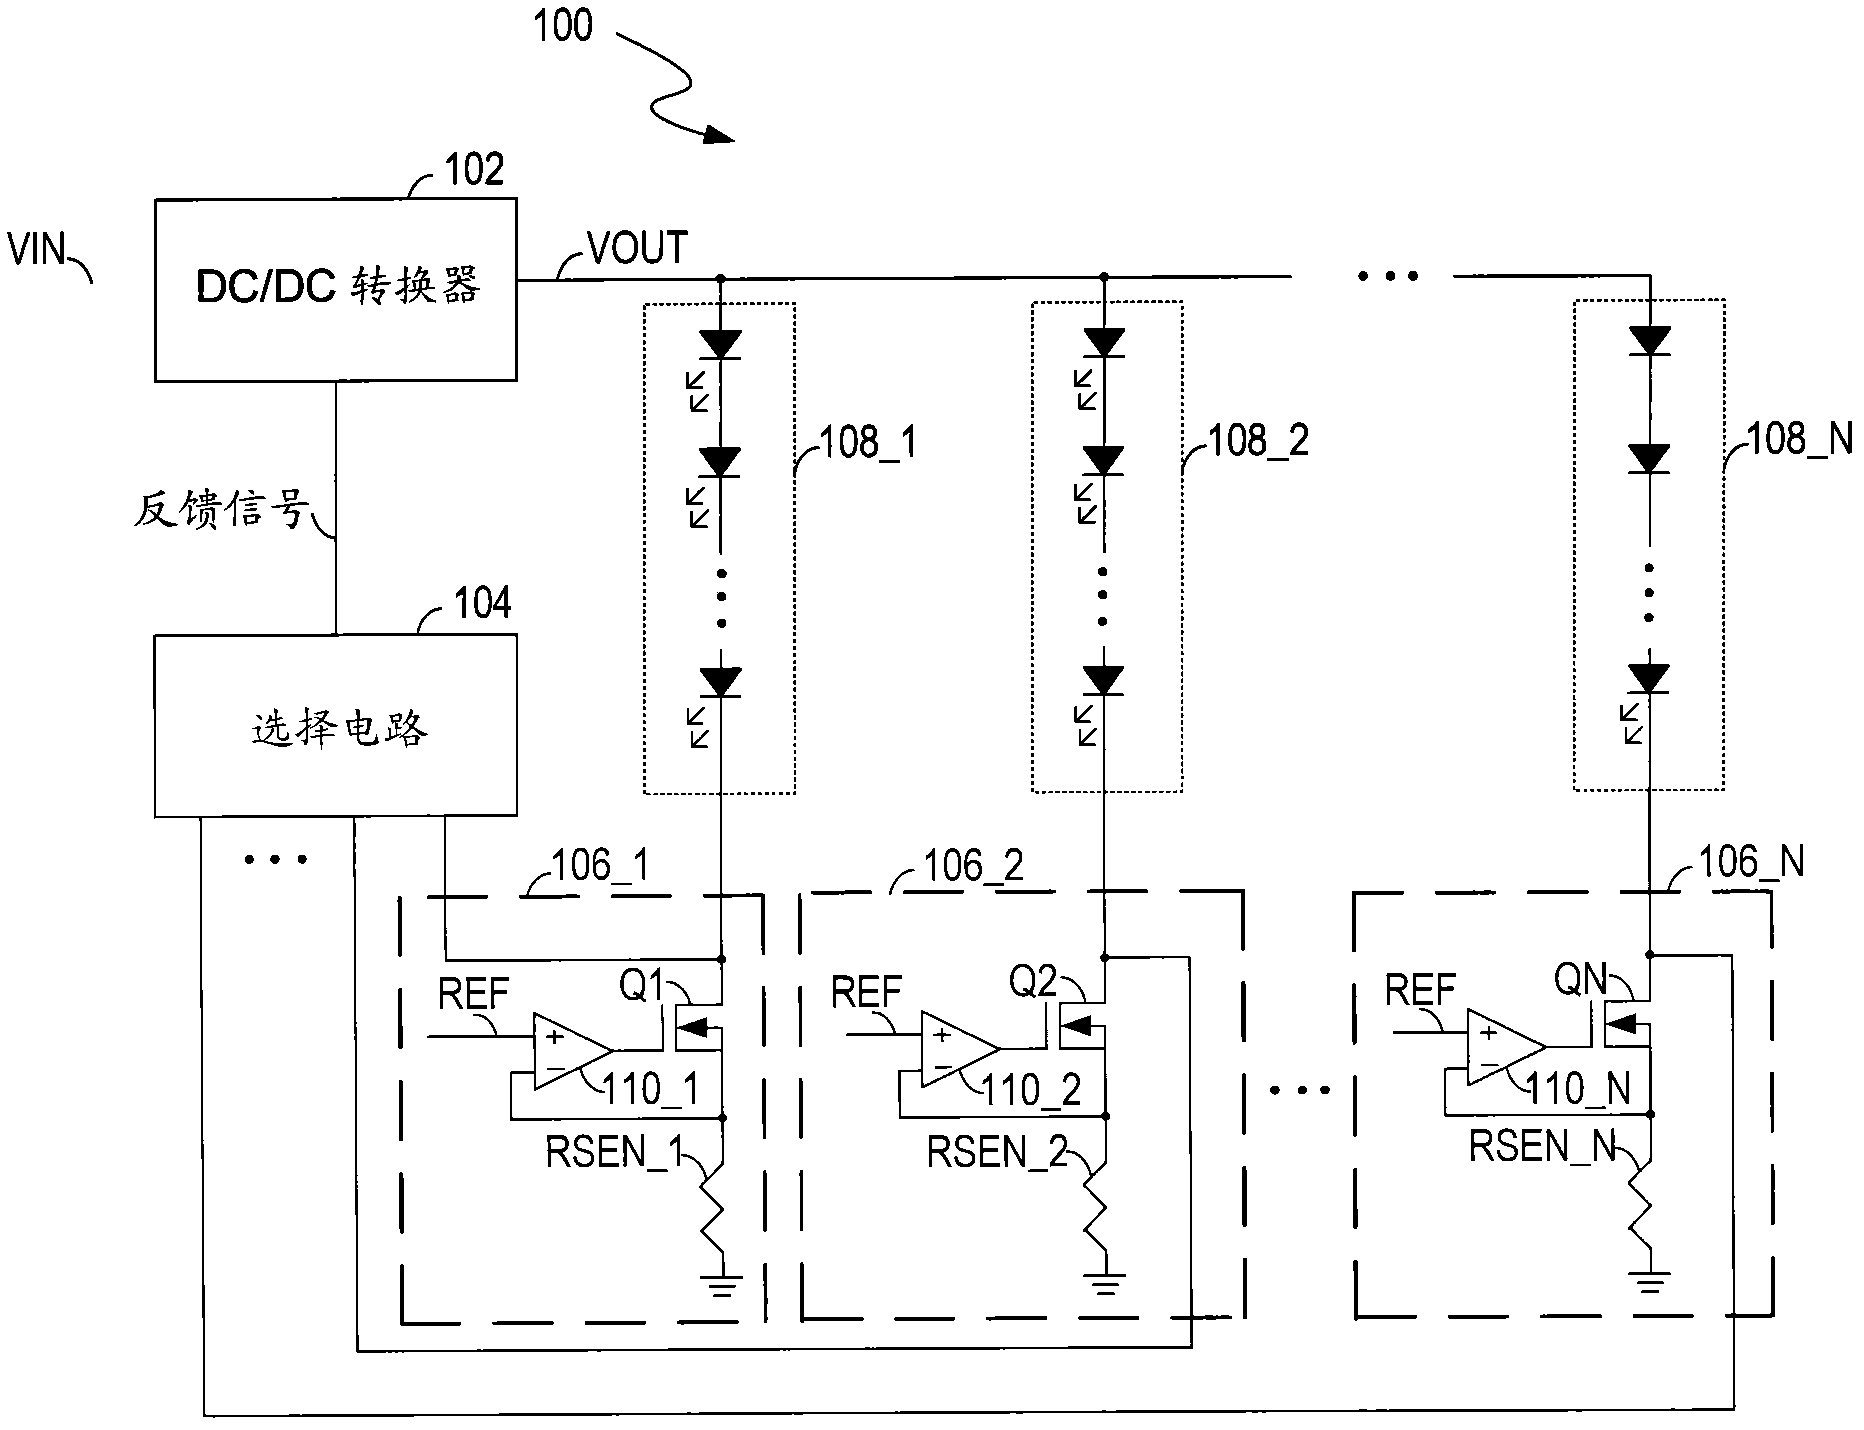 Circuits and methods for driving light sources